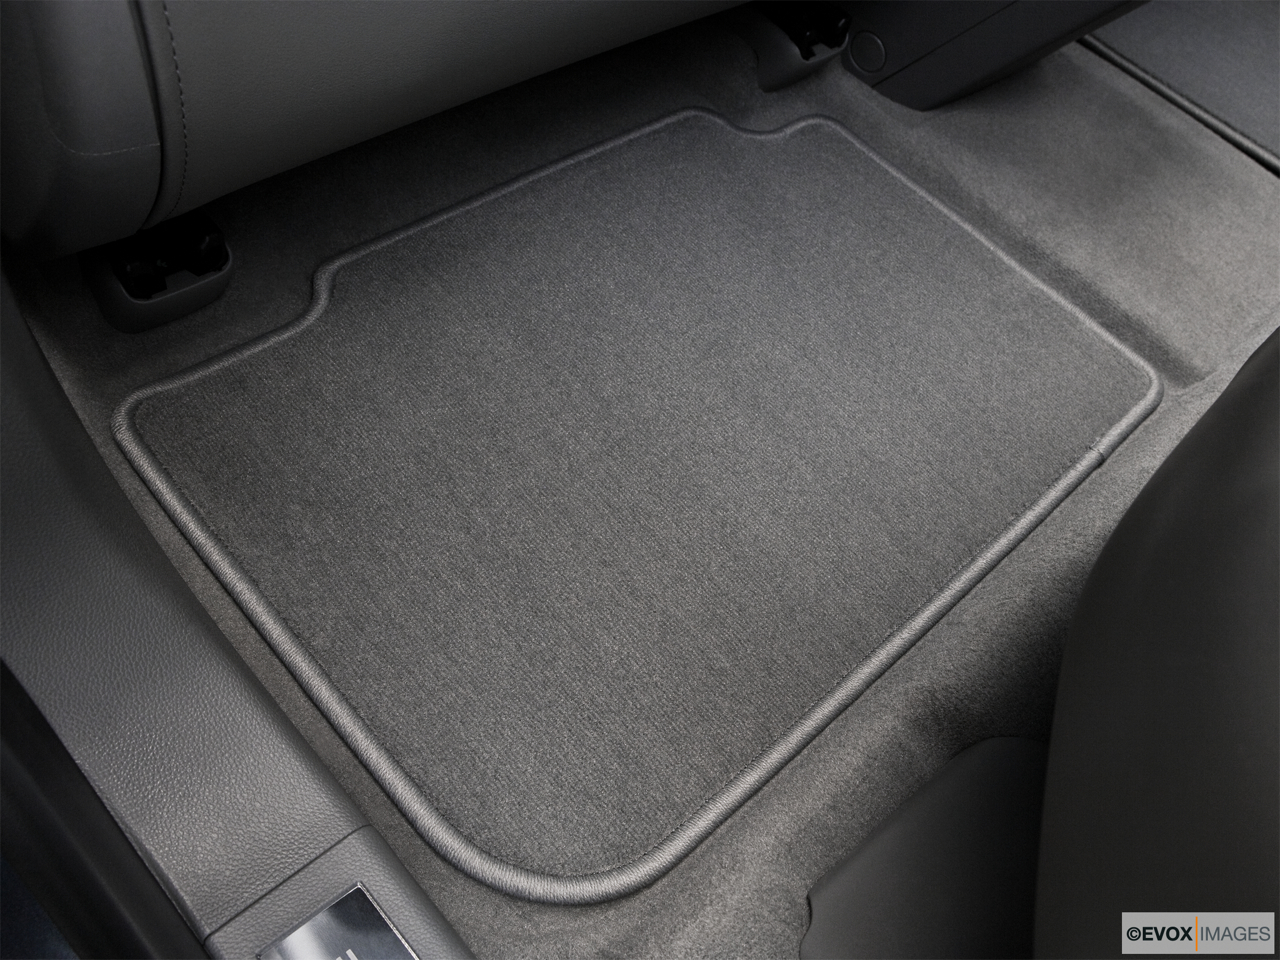 2010 Cadillac SRX Crossover Premium Collection Rear driver's side floor mat. Mid-seat level from outside looking in. 